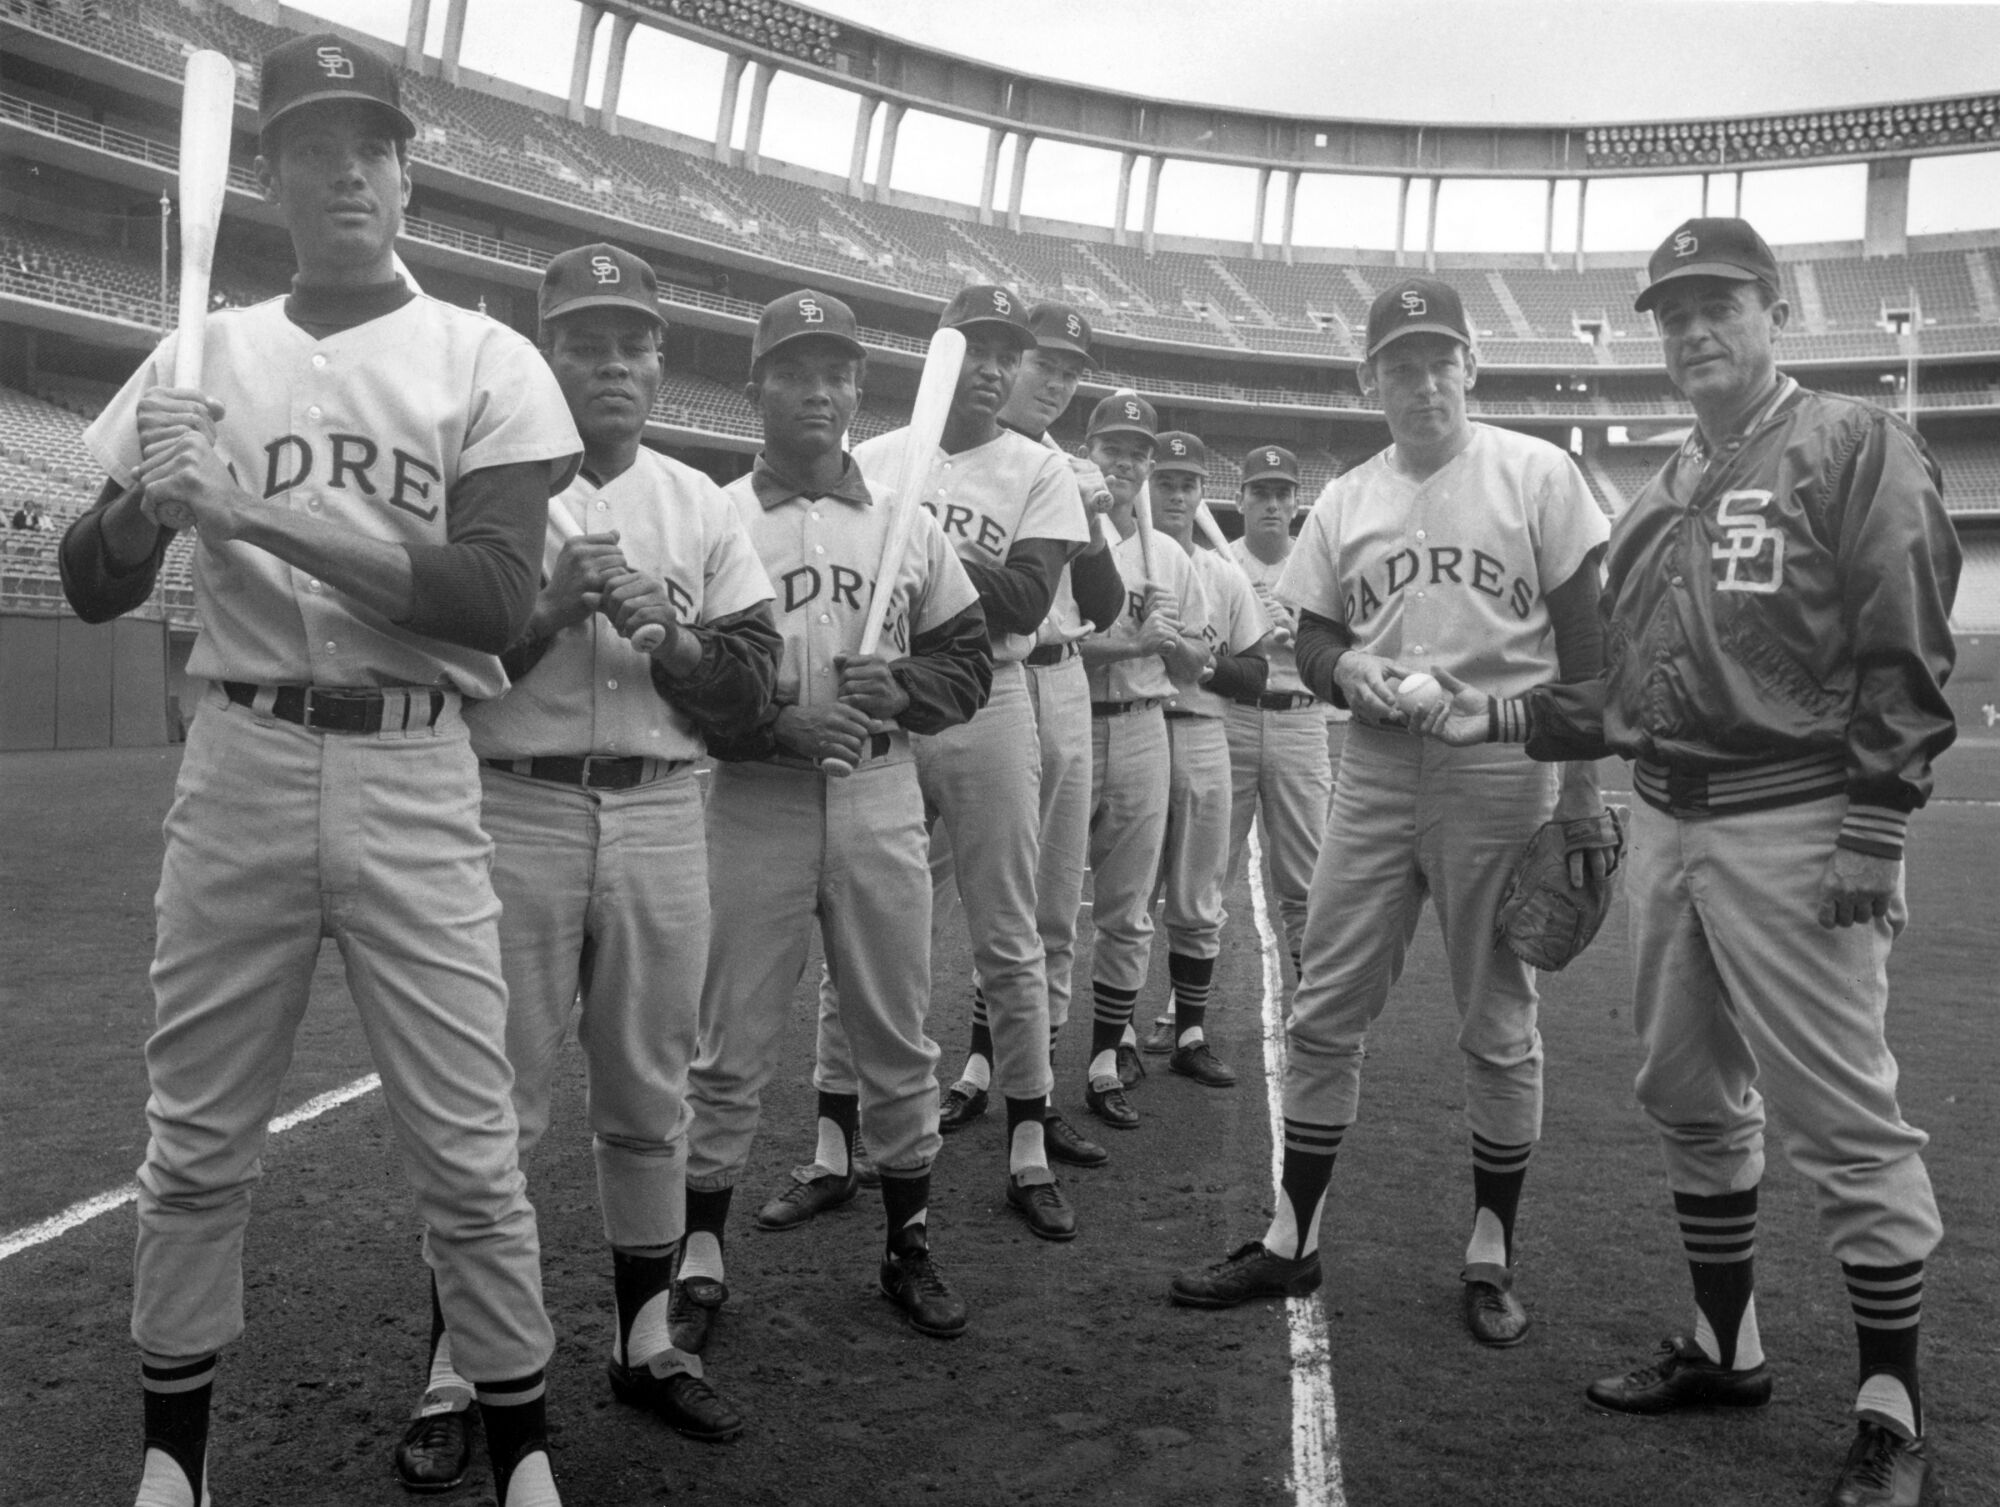 1969 San Diego Padres Opening Day lineup. Photo taken Sunday, April 6, 1969, by staff photographer Dan Tichonchuk.